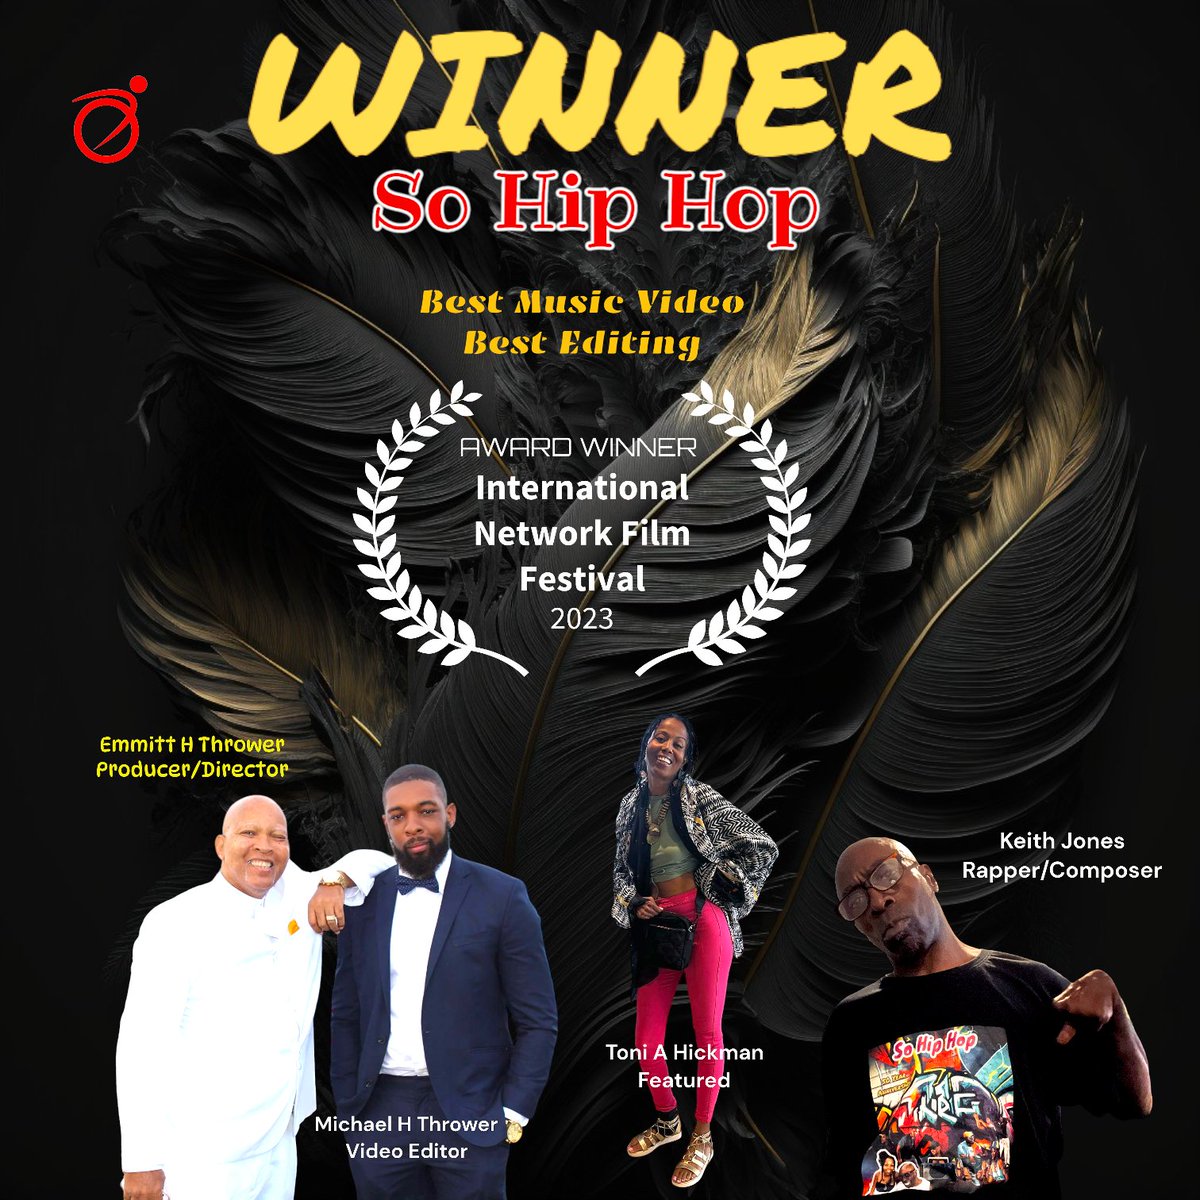 Amazing news! We Won! For our Music Video 'SO HIP HOP' @ International Network Film Festival Composer/Rapper @dasoultoucha Featured @tonihickman Produced by wabisabiproductions.com #disabled #filmfestival #awardwinning #disabilities #cerebralpalsy #strokesurvivor #hiphop50